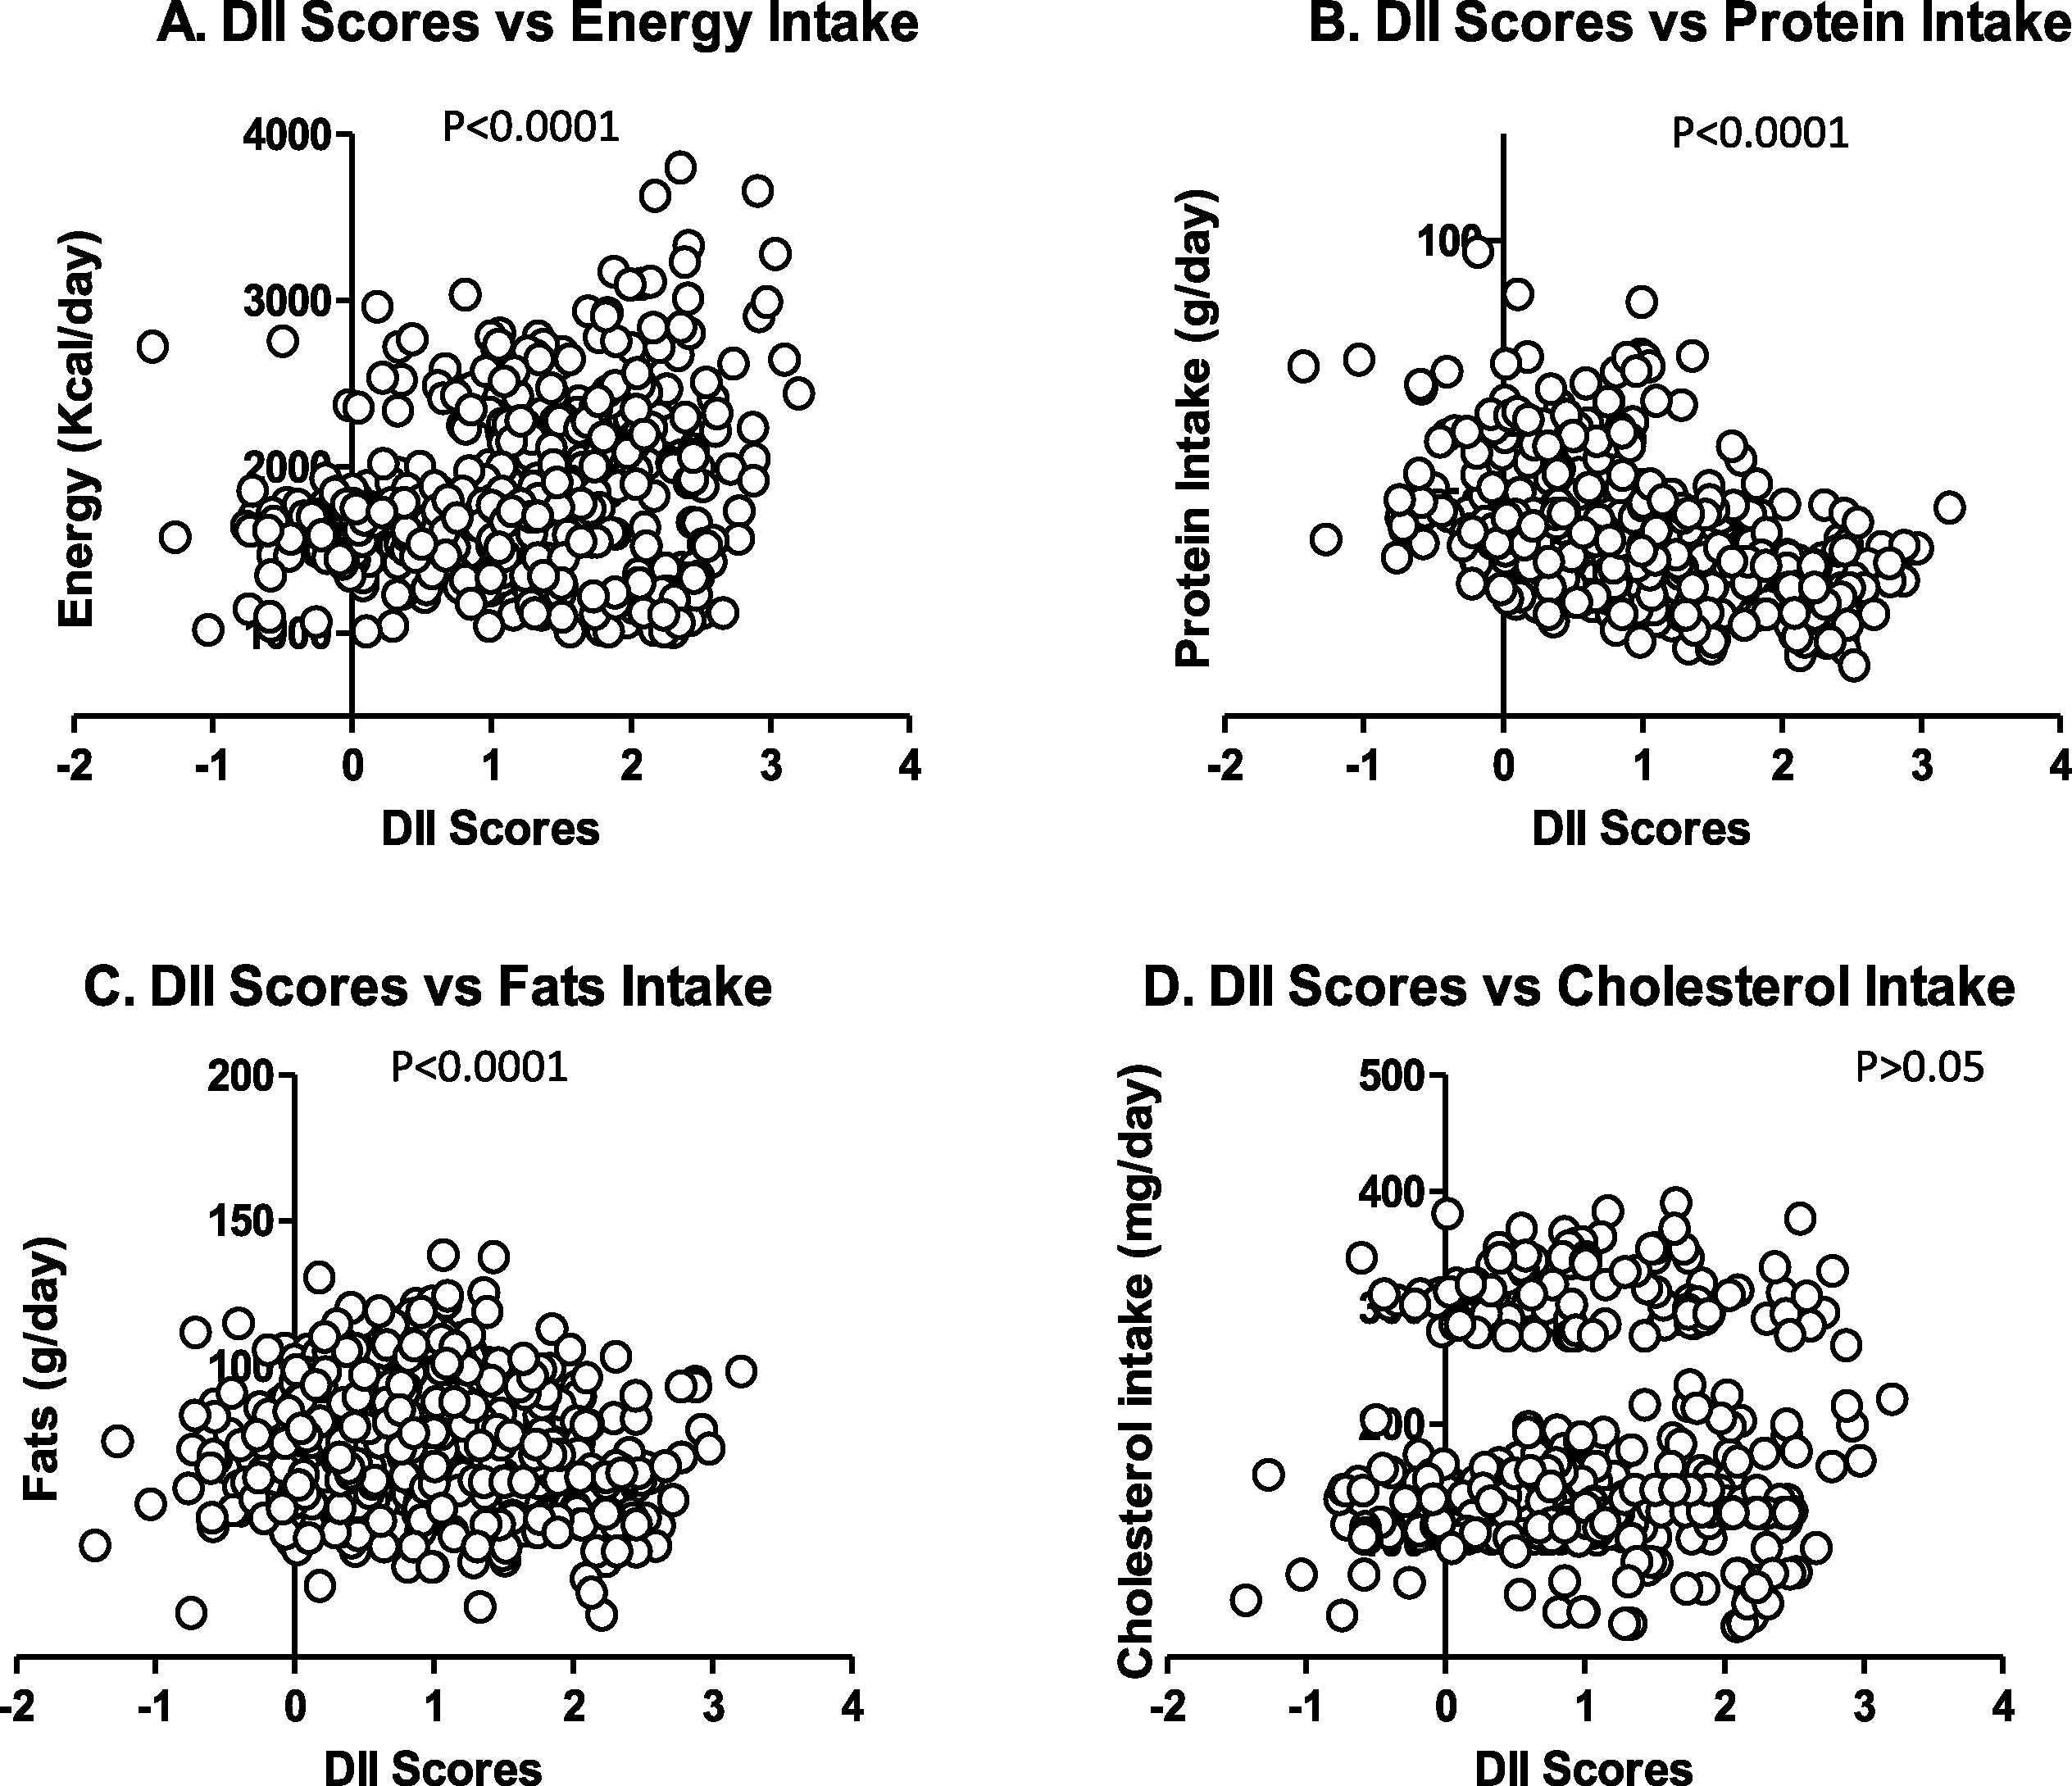 Scatterplot of DII score vs. Energy Intake (A), Protein Intake (B), Fats Intake (C) and cholesterol intake (D).